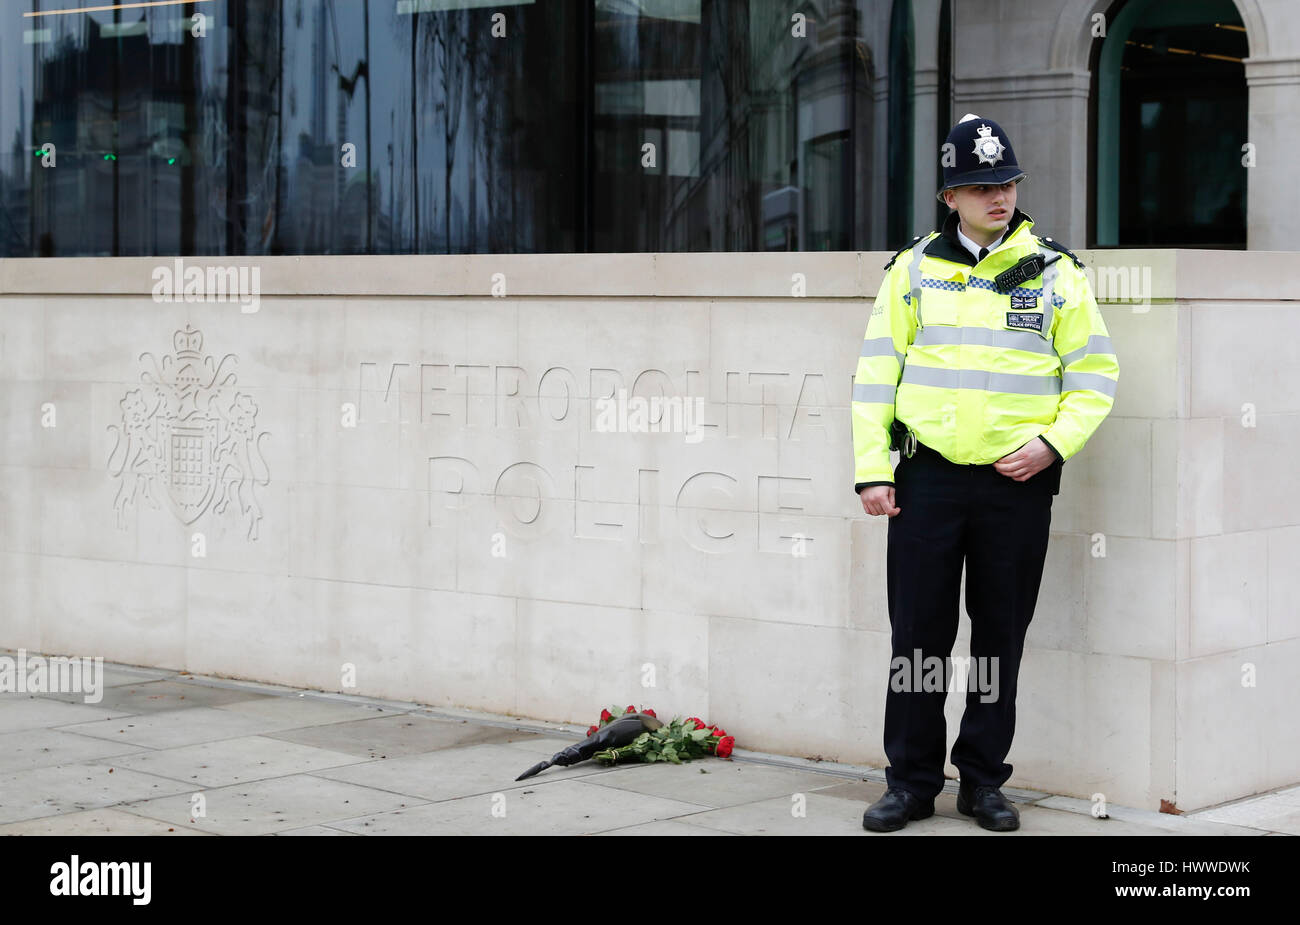 London, Britain. 23rd Mar, 2017. A police officer stands guard at Scotland Yard, headquarters of London's Metropolitan Police in London, Britain, on March 23, 2017. Credit: Han Yan/Xinhua/Alamy Live News Stock Photo